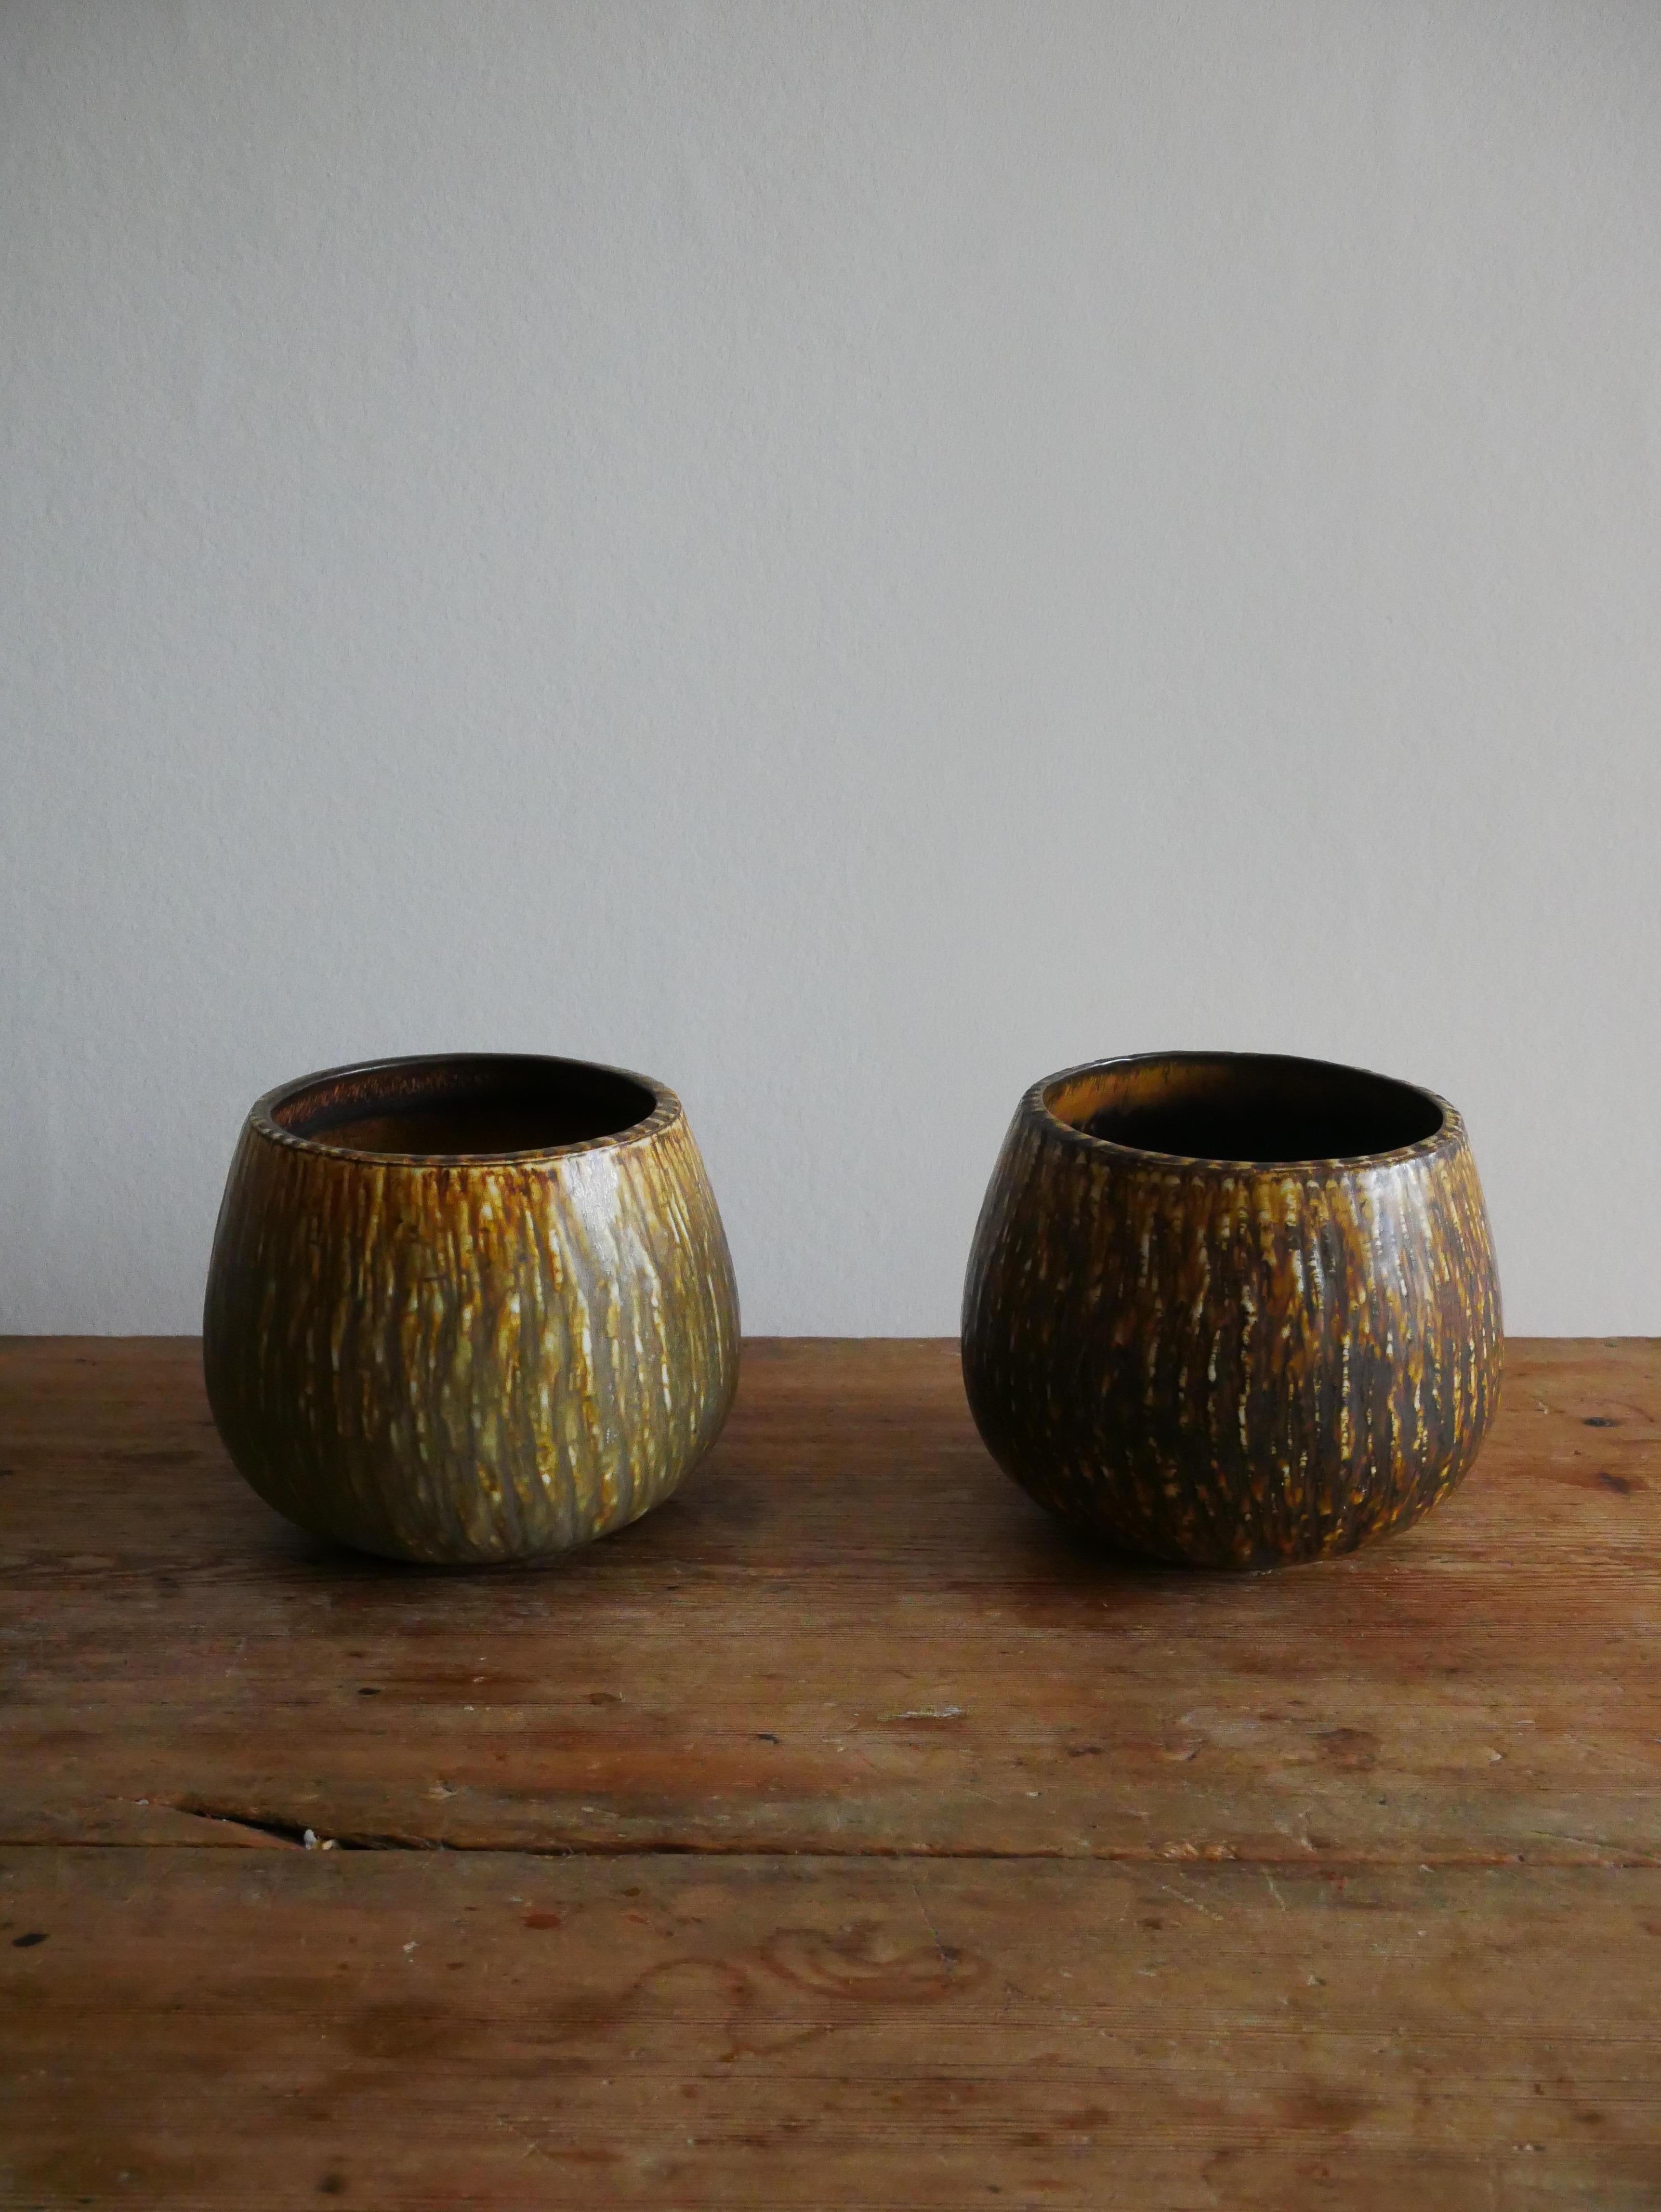 Set of Two Ceramic Pieces, Rubus, Gunnar Nylund, Rörstrand, Sweden.

The bowls has a silky, textured surface with brown, green and yellow colors and faint glaze with a matt finish. Great condition and first quality. 

Sell as a pair.

